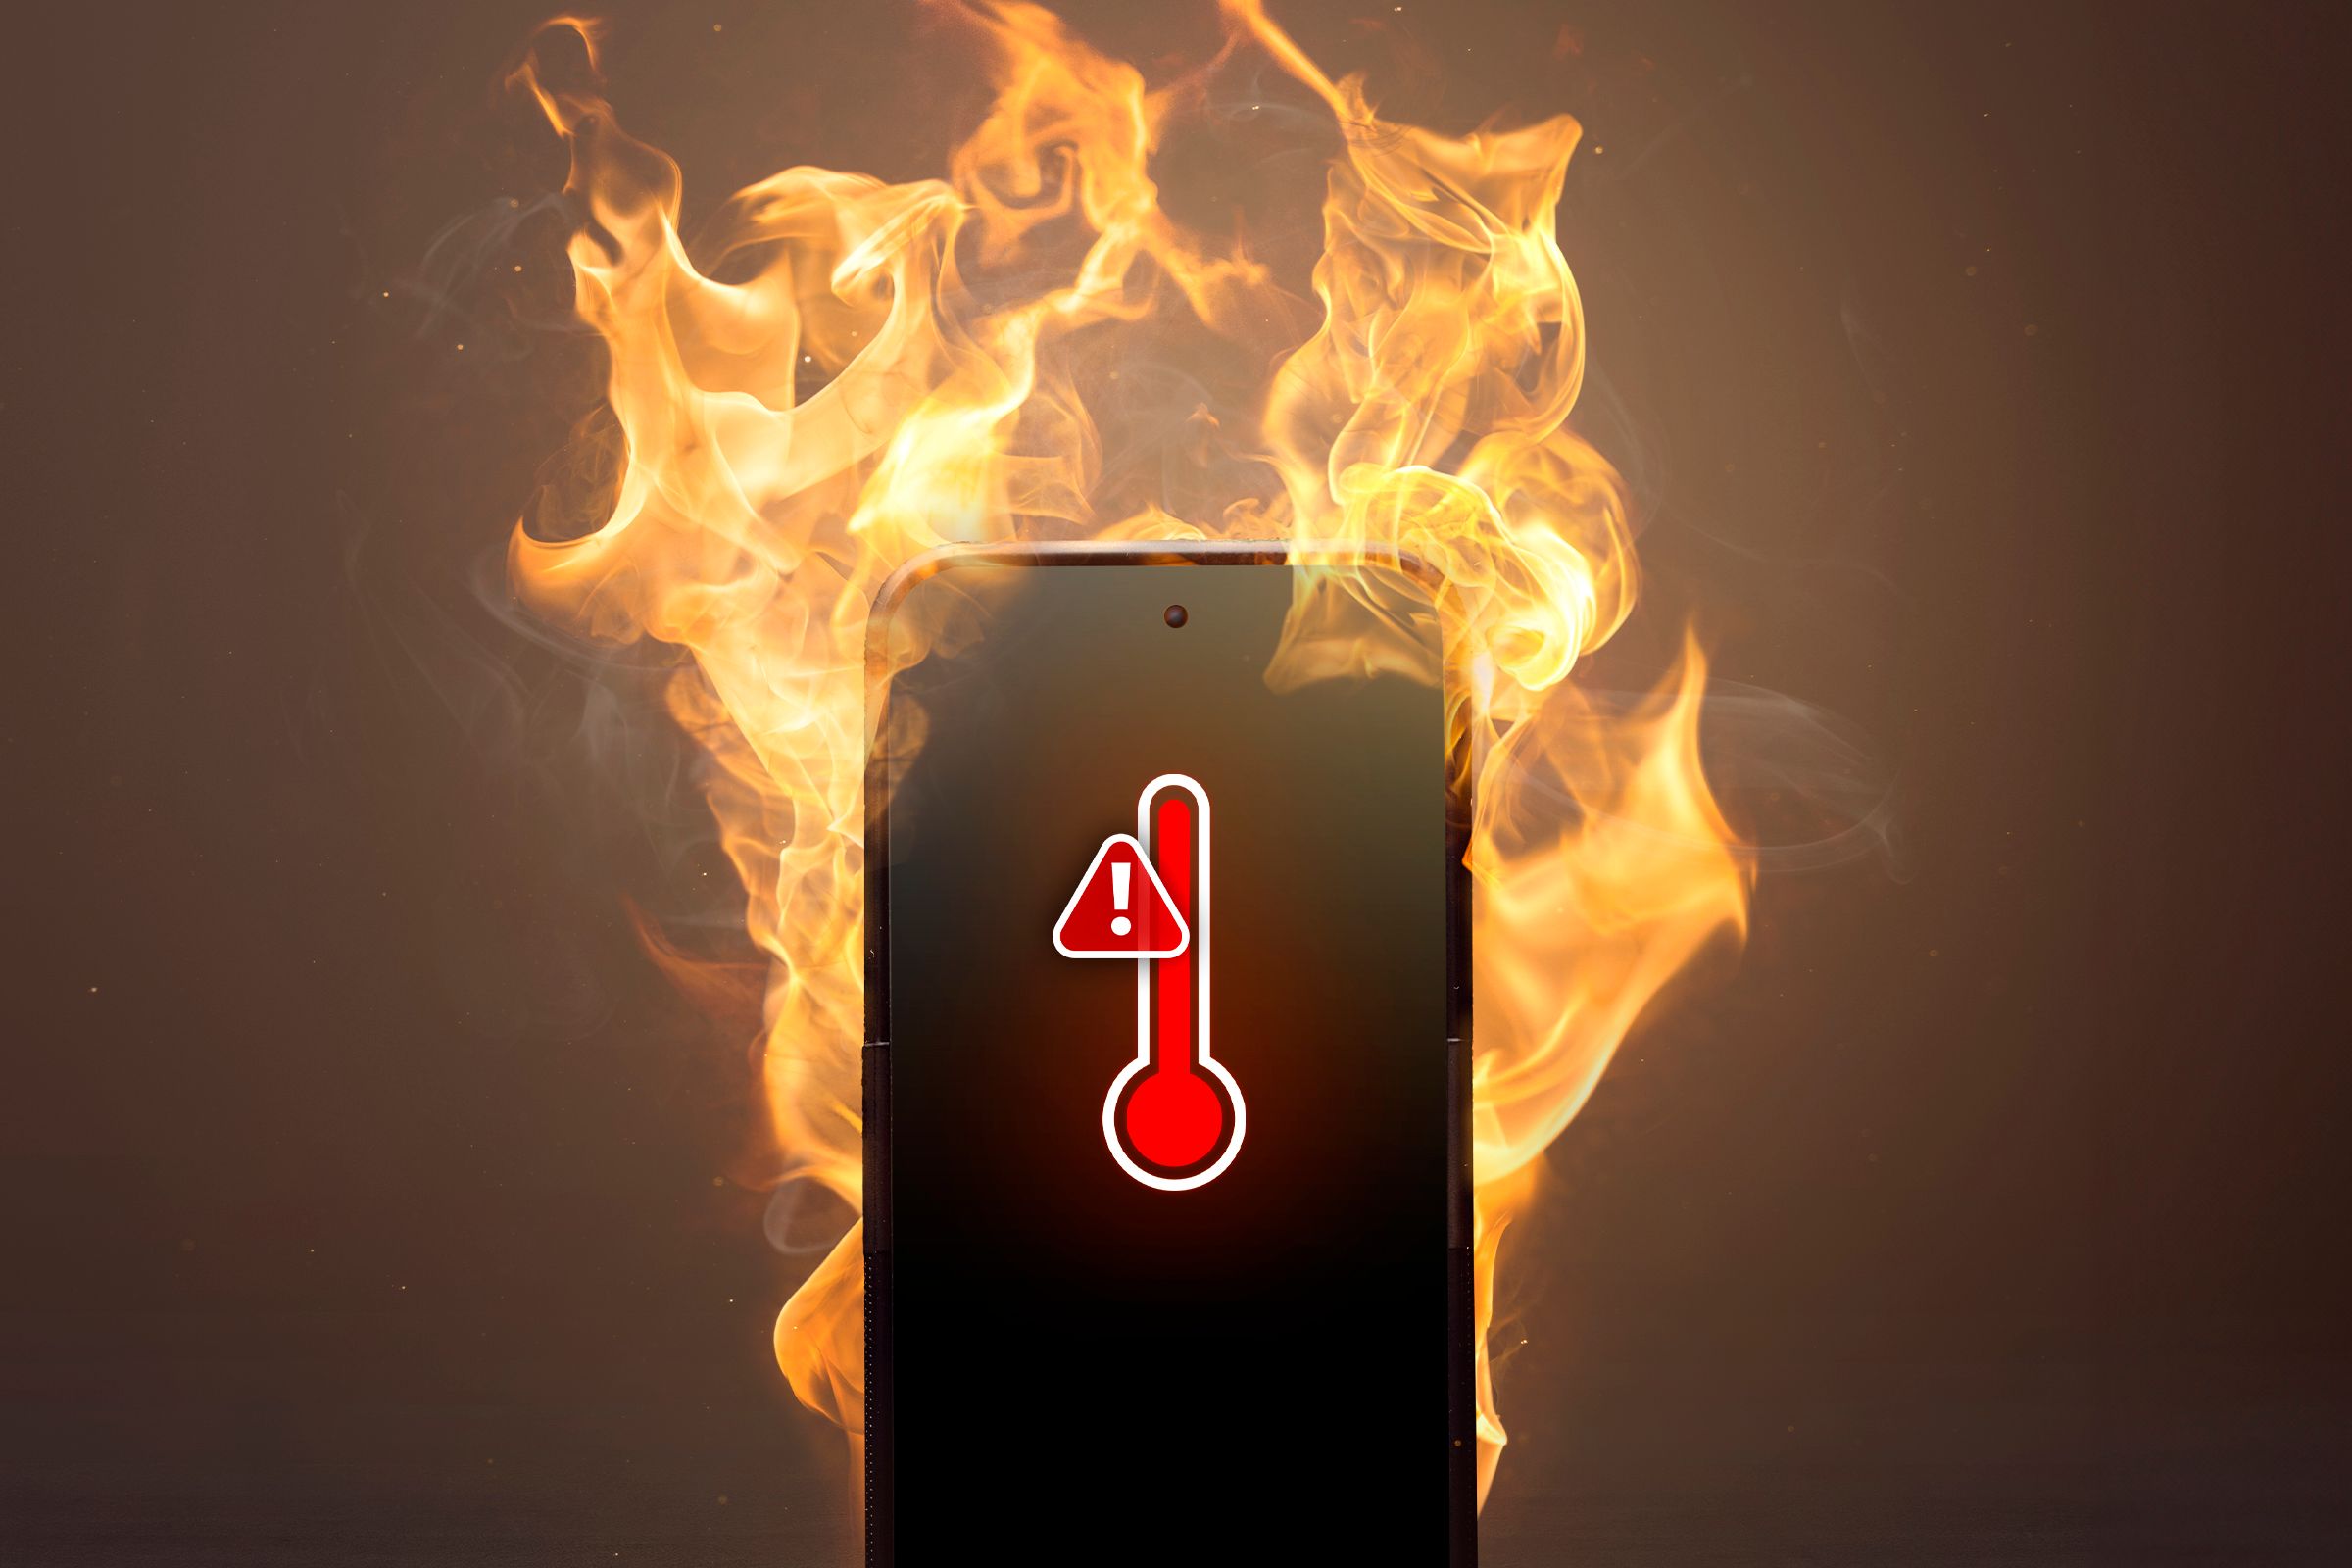 A burning phone with a thermometer and an alert sign.